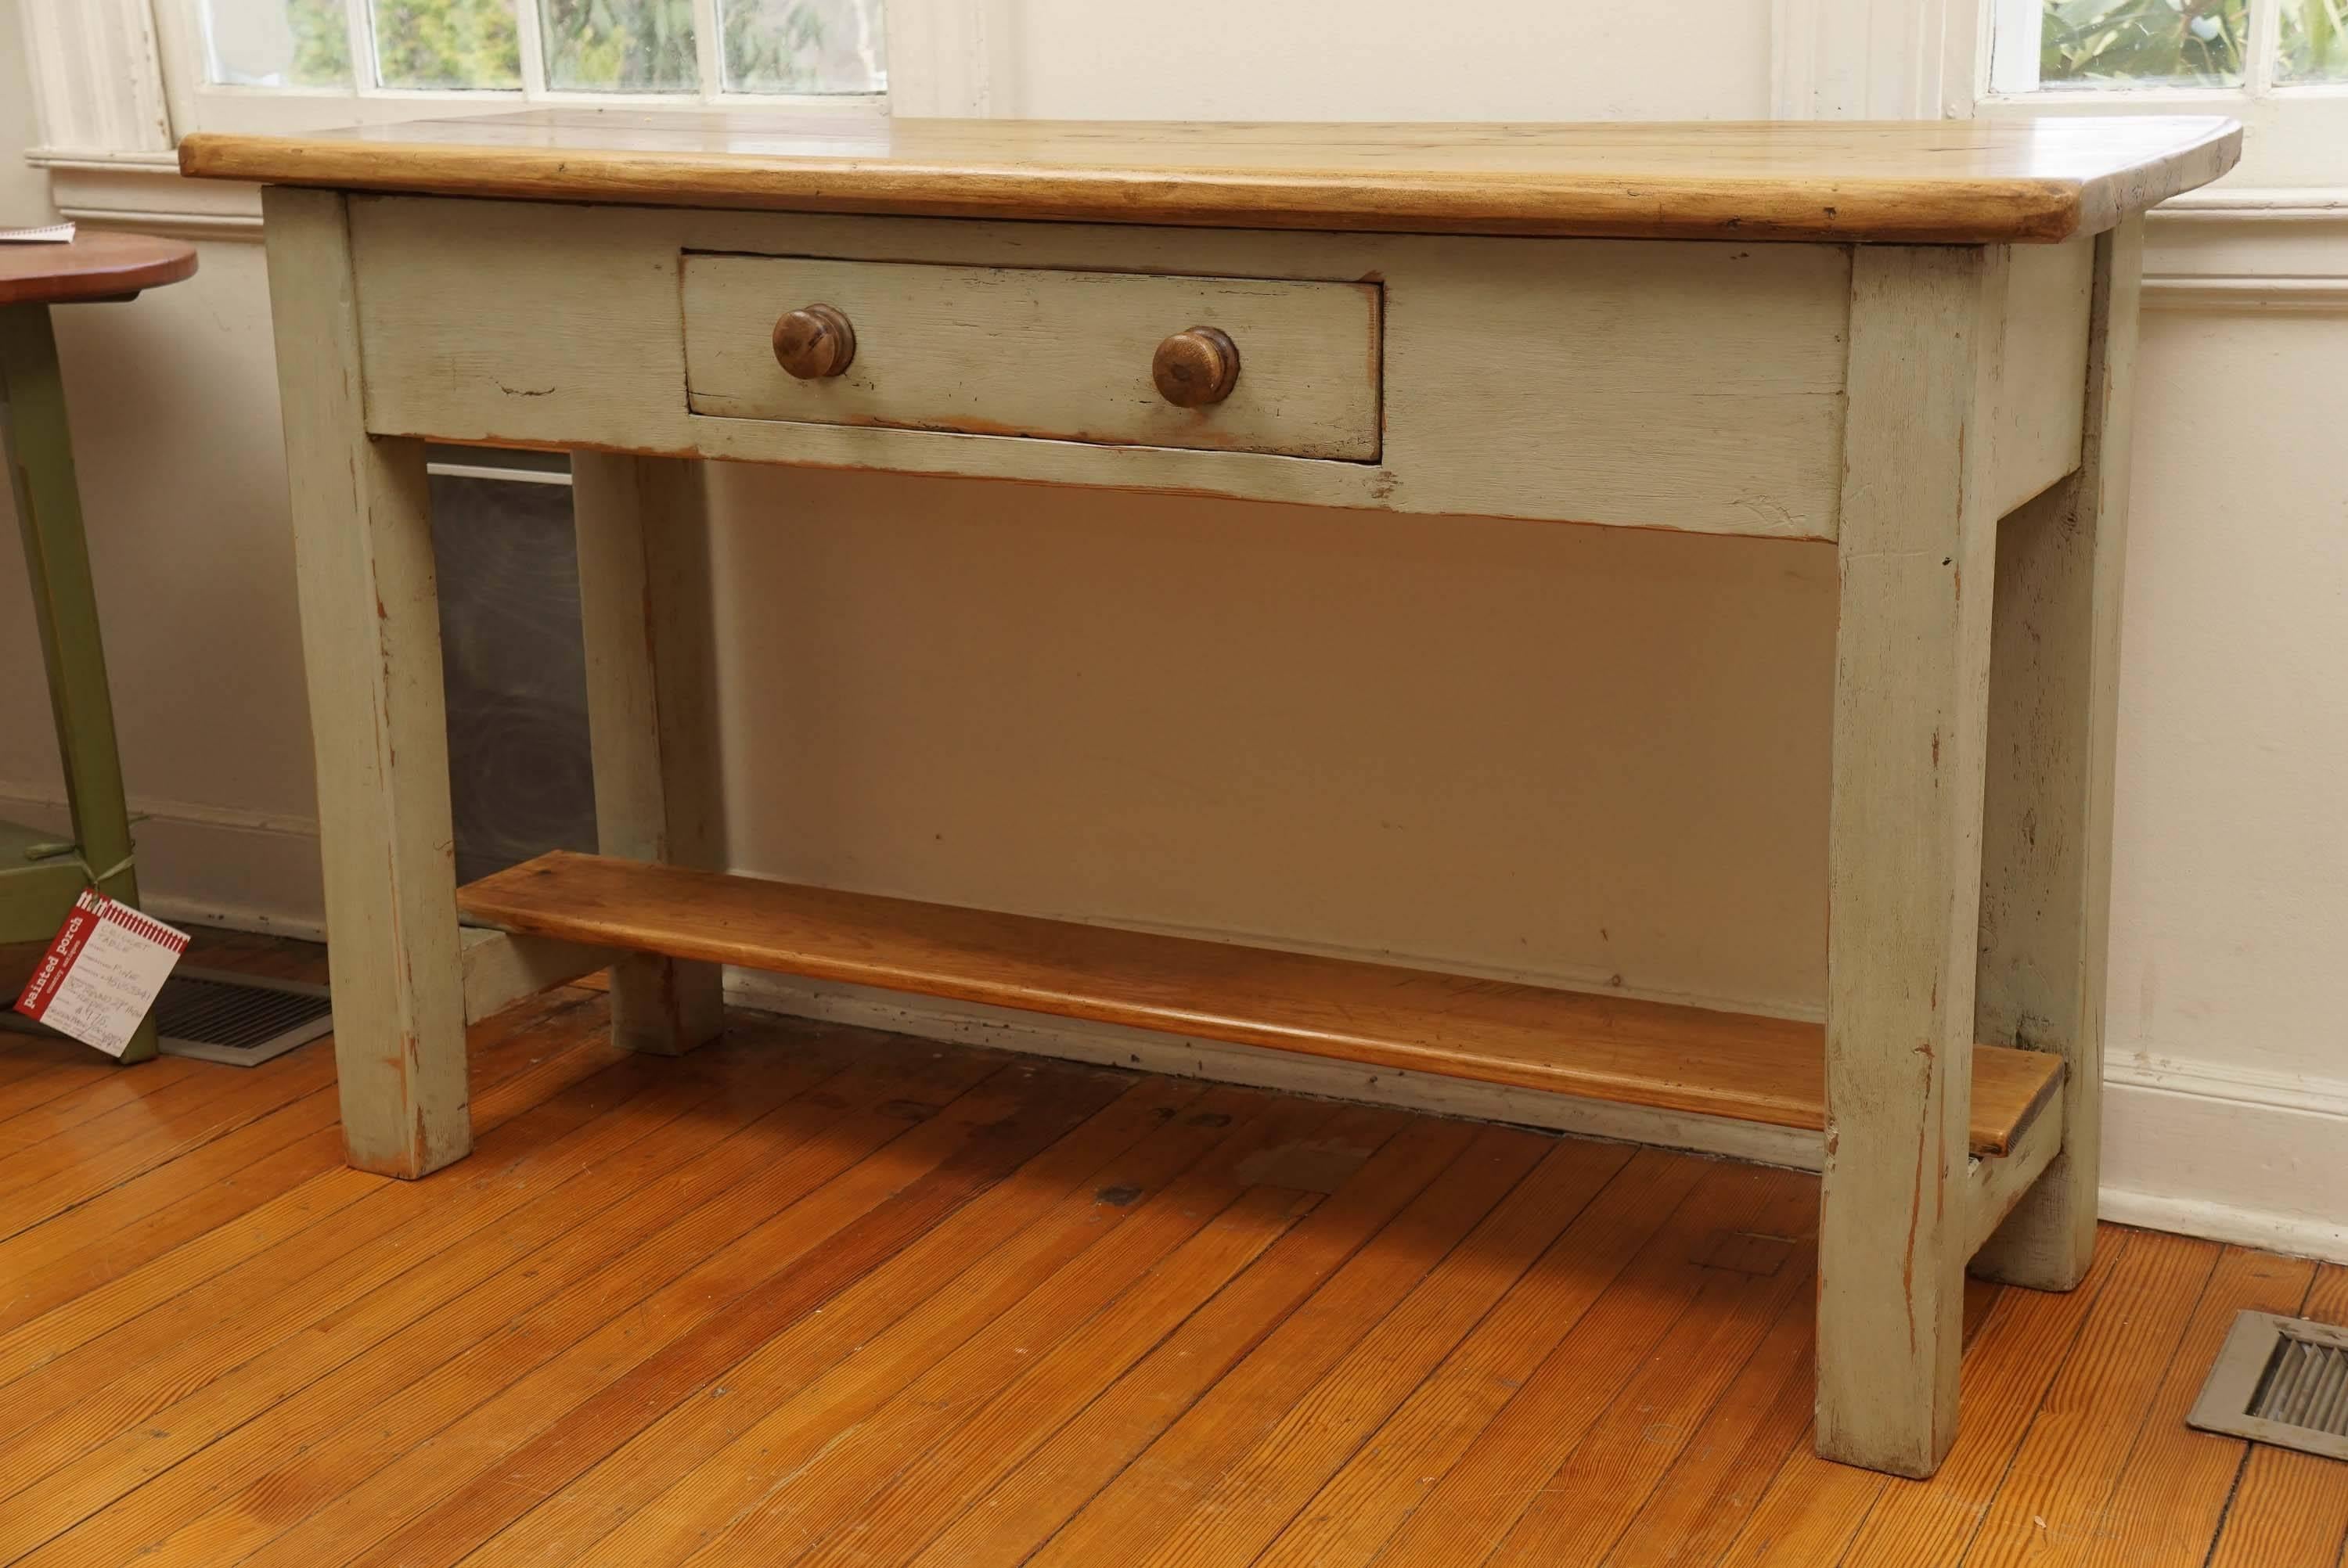 870 - This Irish server has a pine pot board shelf and a wonderful pine top. Painted in newer French grey paint this is a very nice sized serving table with a large drawer and two wooden pulls. We love Irish furniture at Painted Porch.